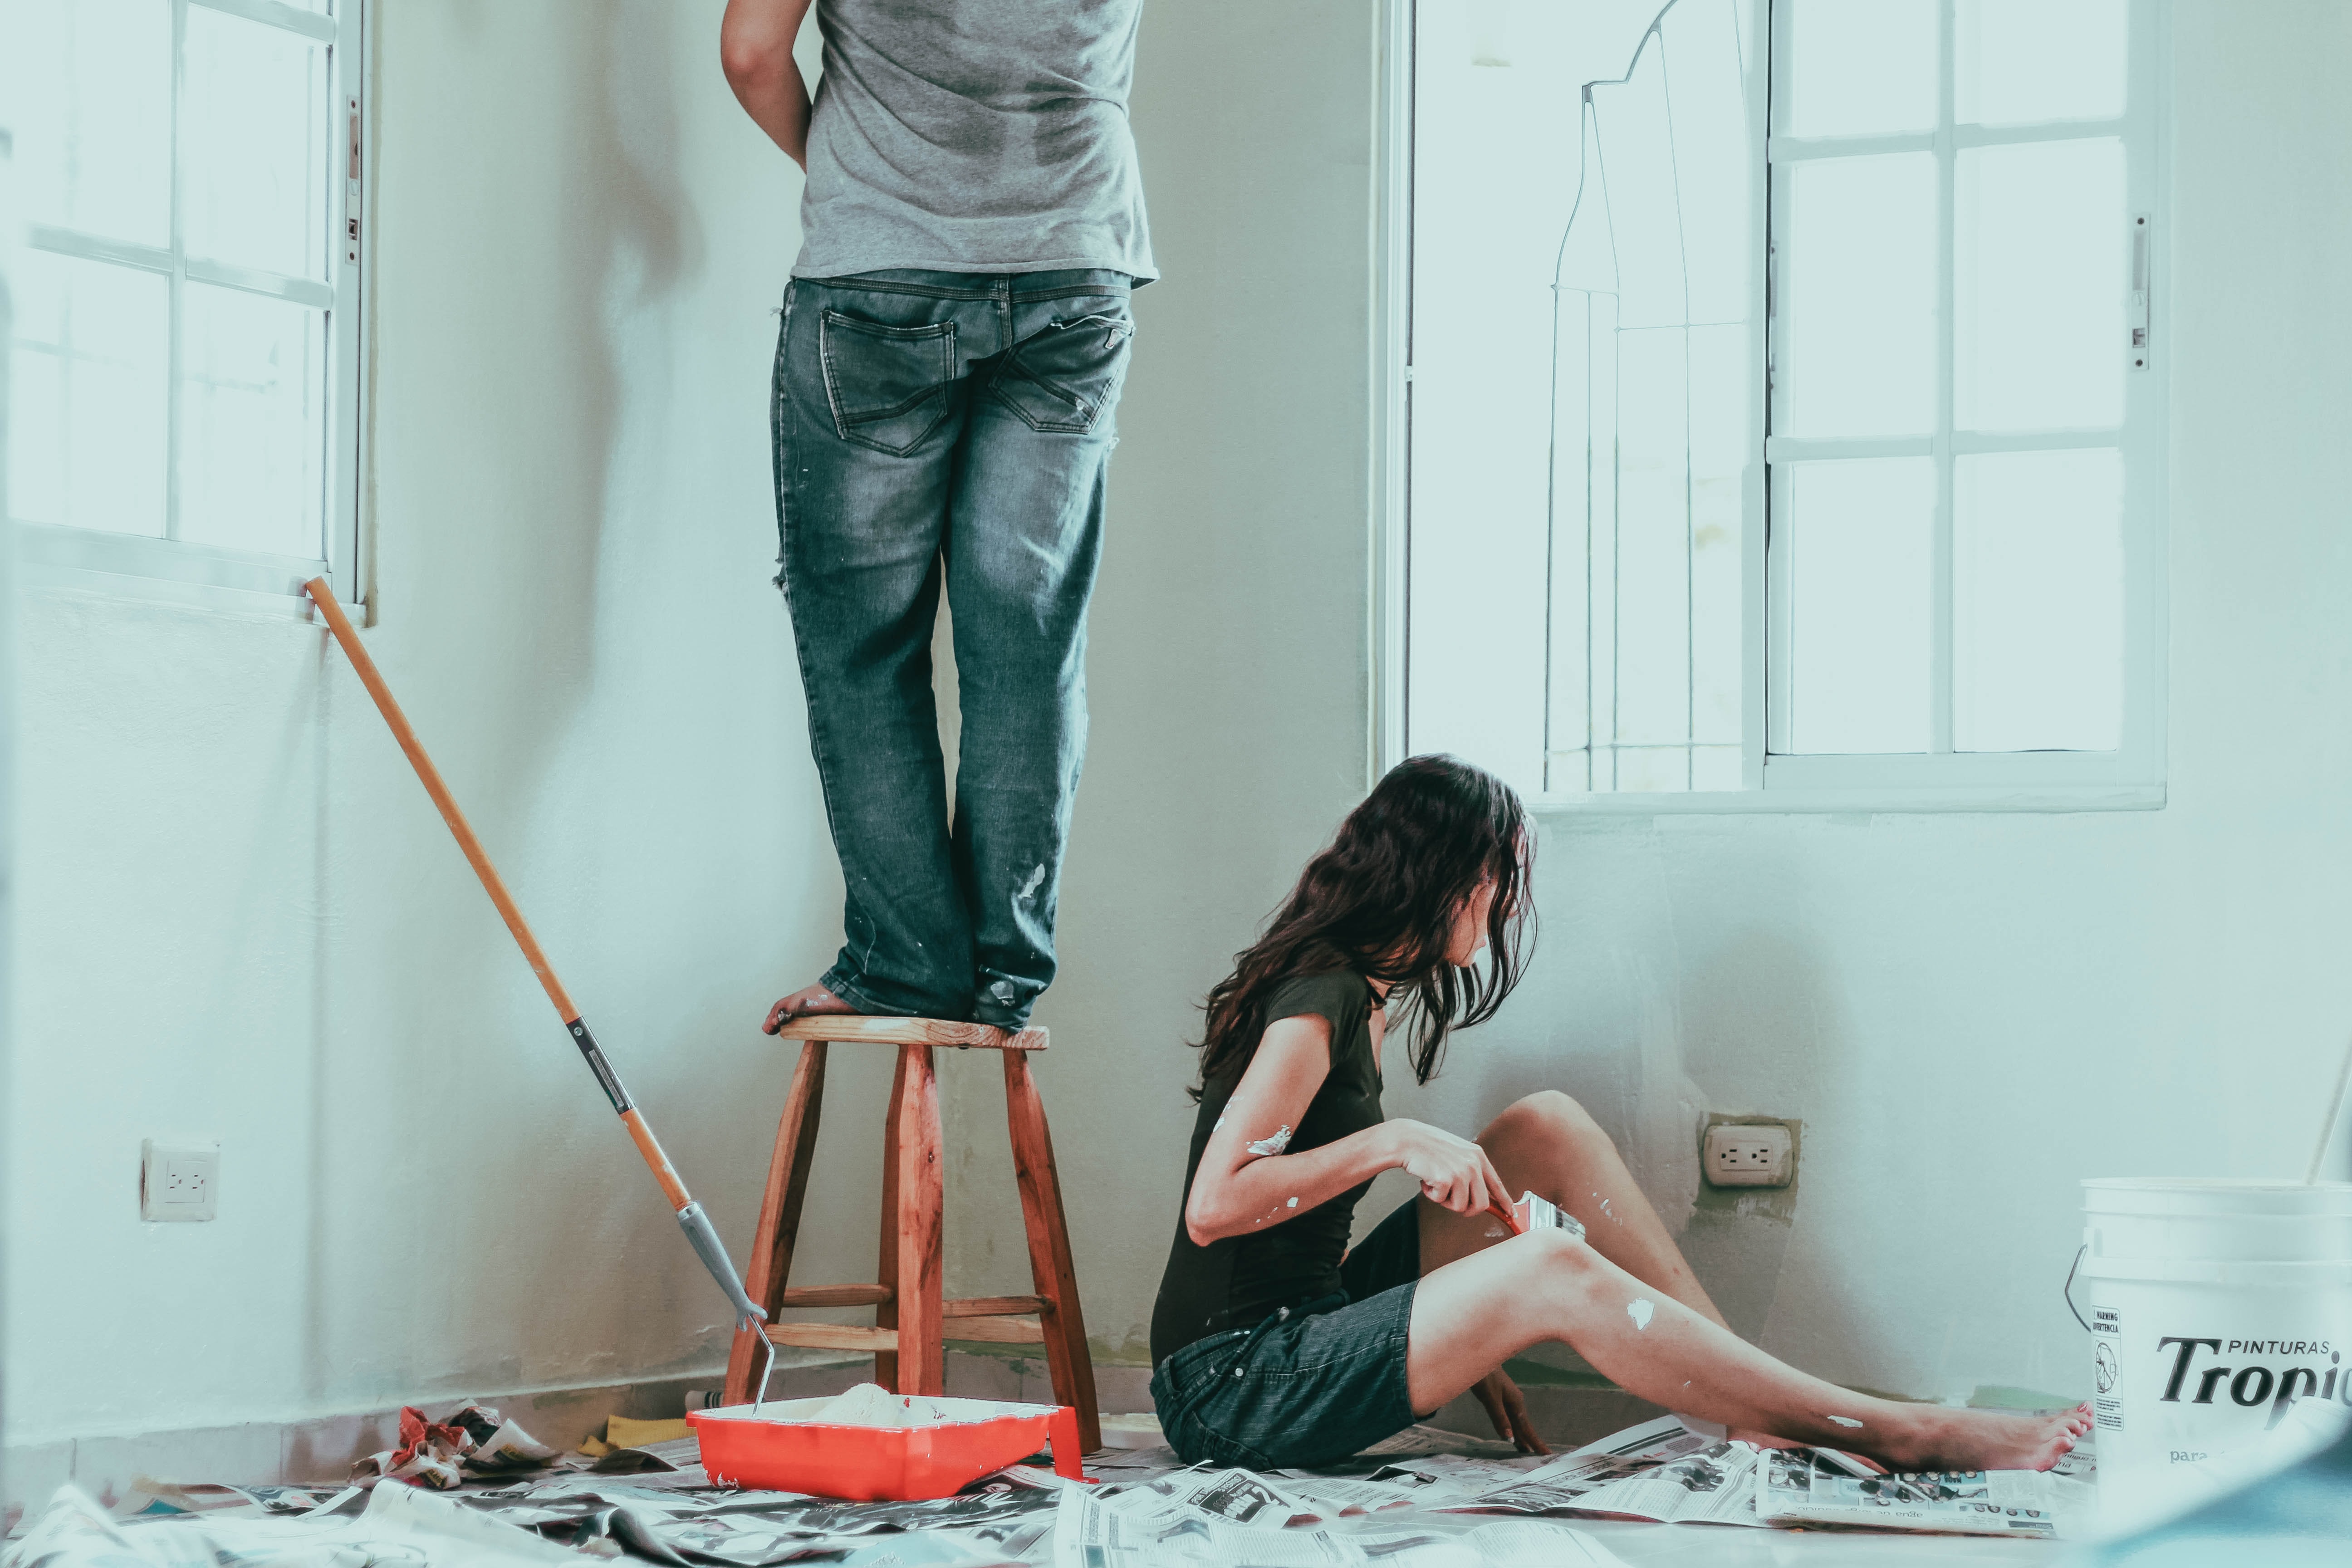 Top 10 Home Fixer Upper Trends in 2021. Couple Painting Room Together.